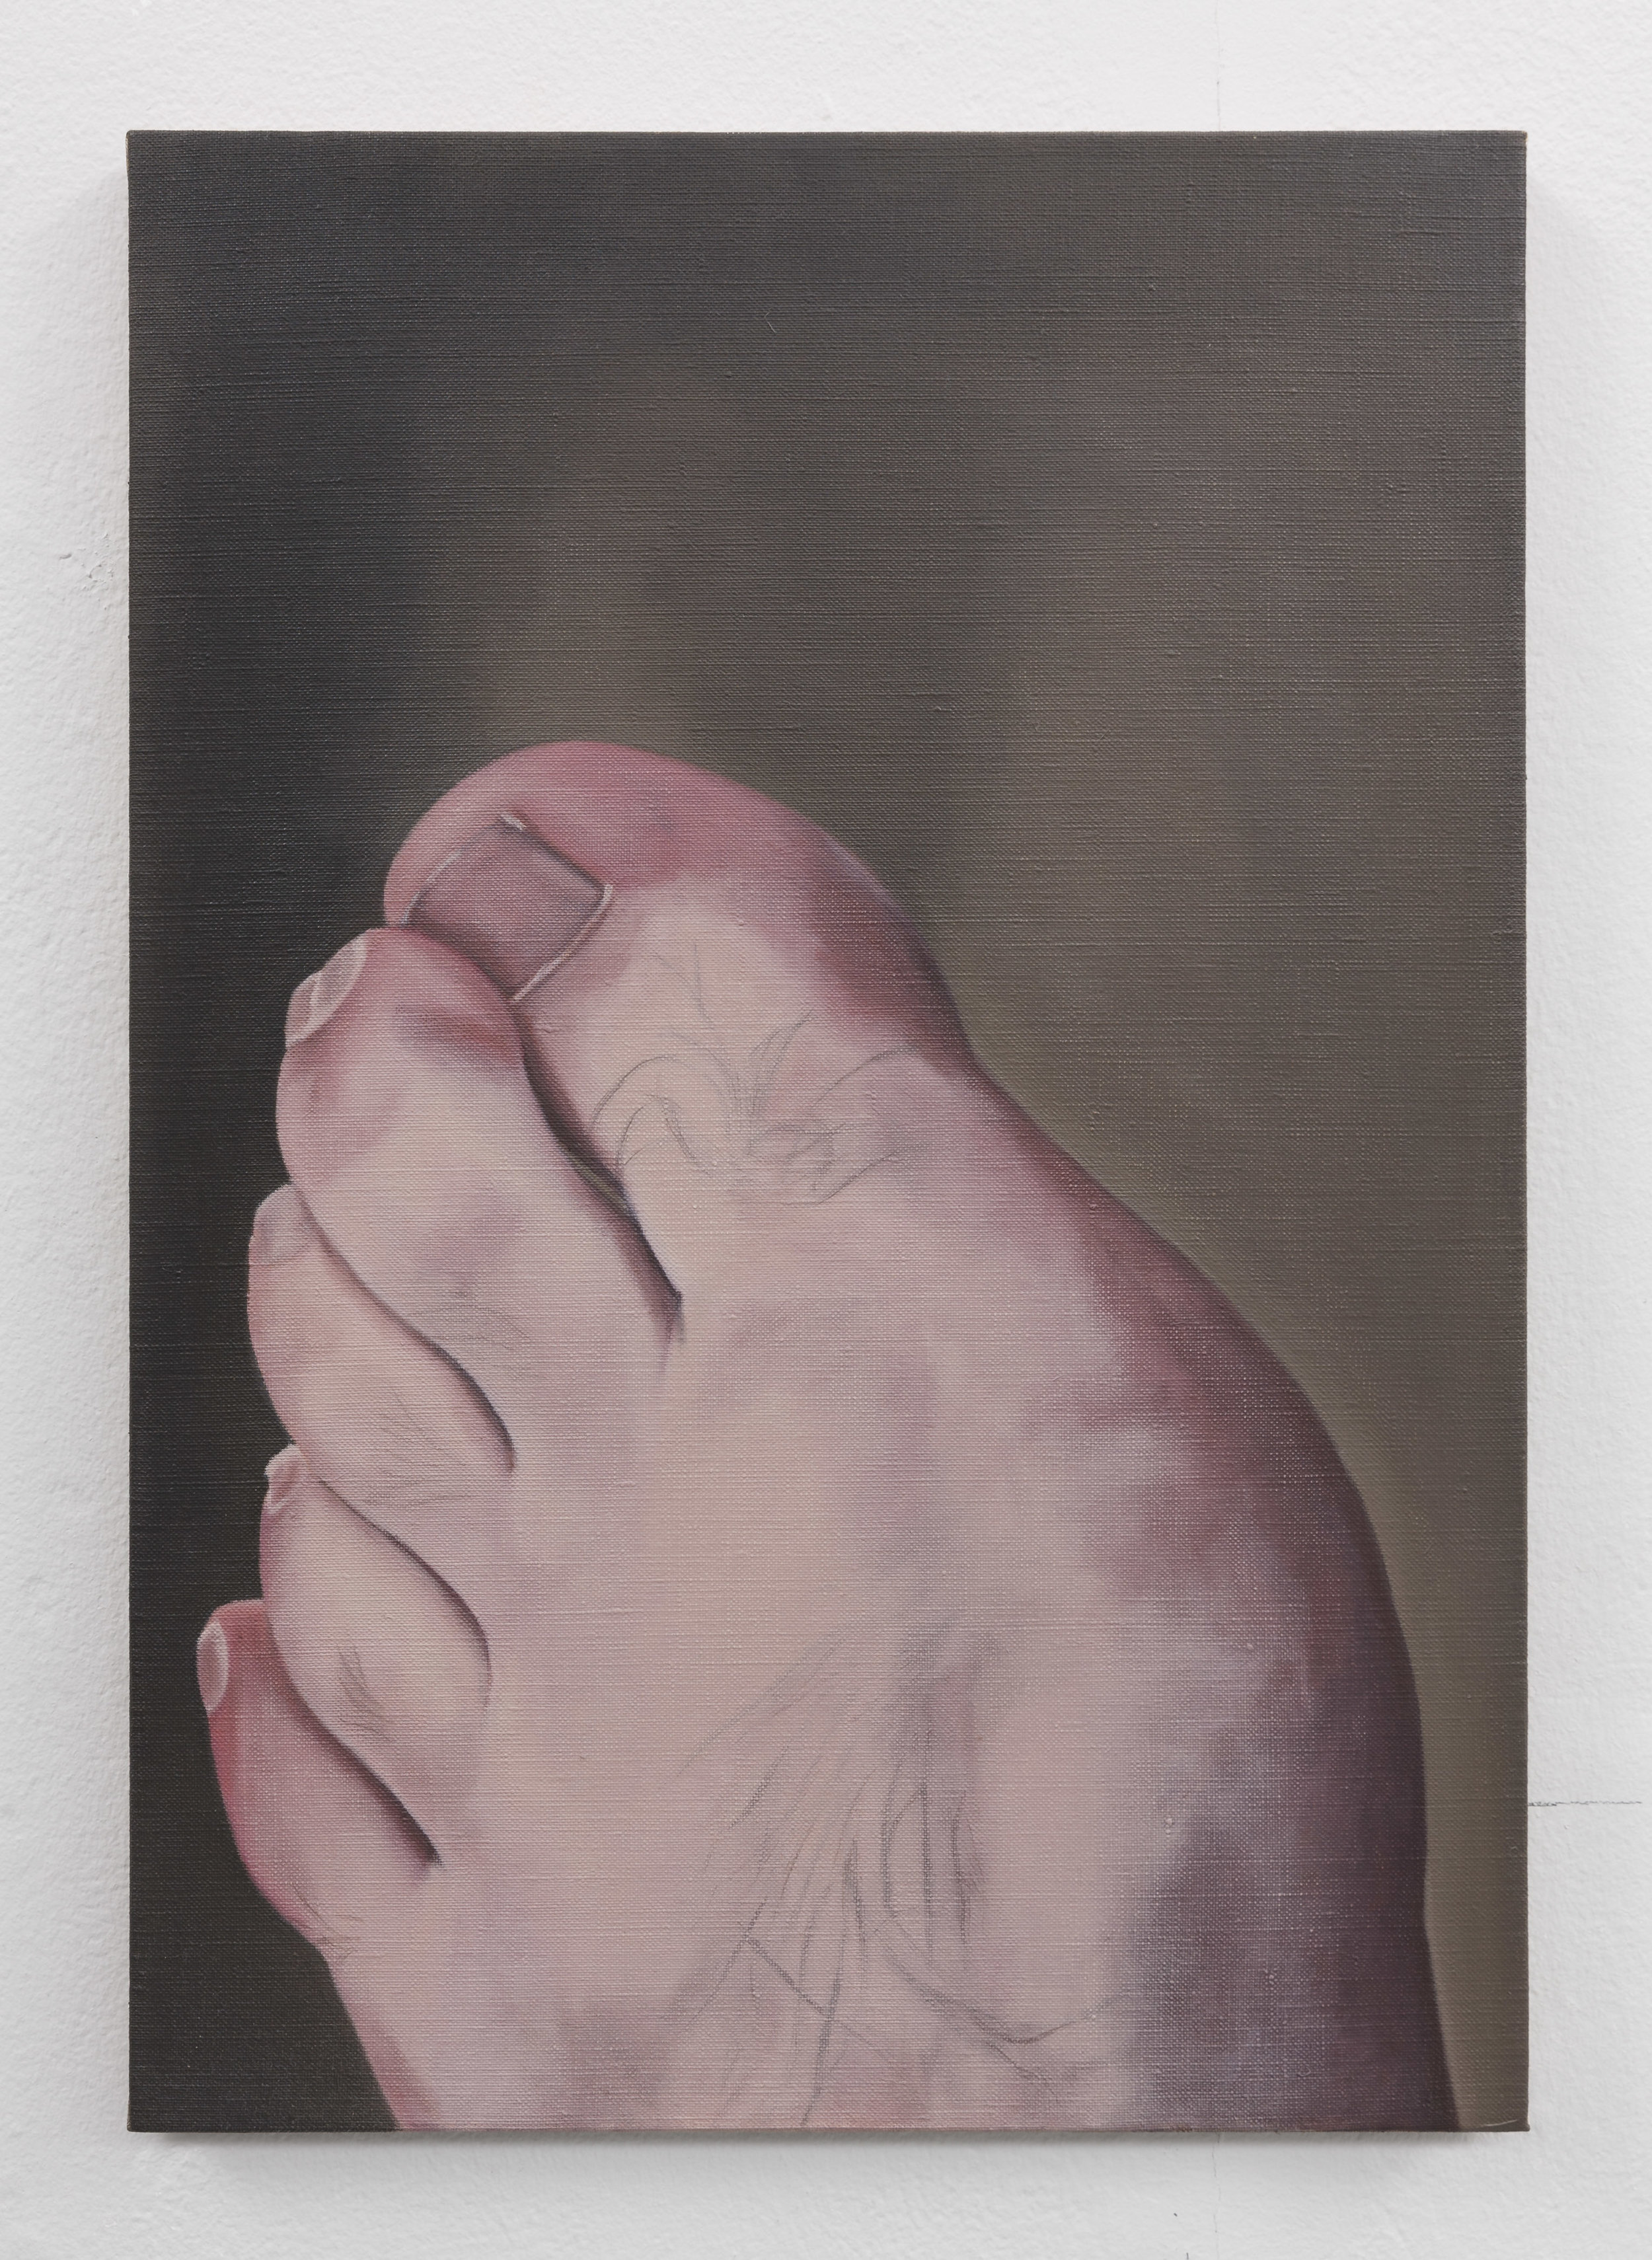  The Artist's Foot | 2018 | Oil on linen | 52.5 x 37.5 cm | Photo Lee Welch 